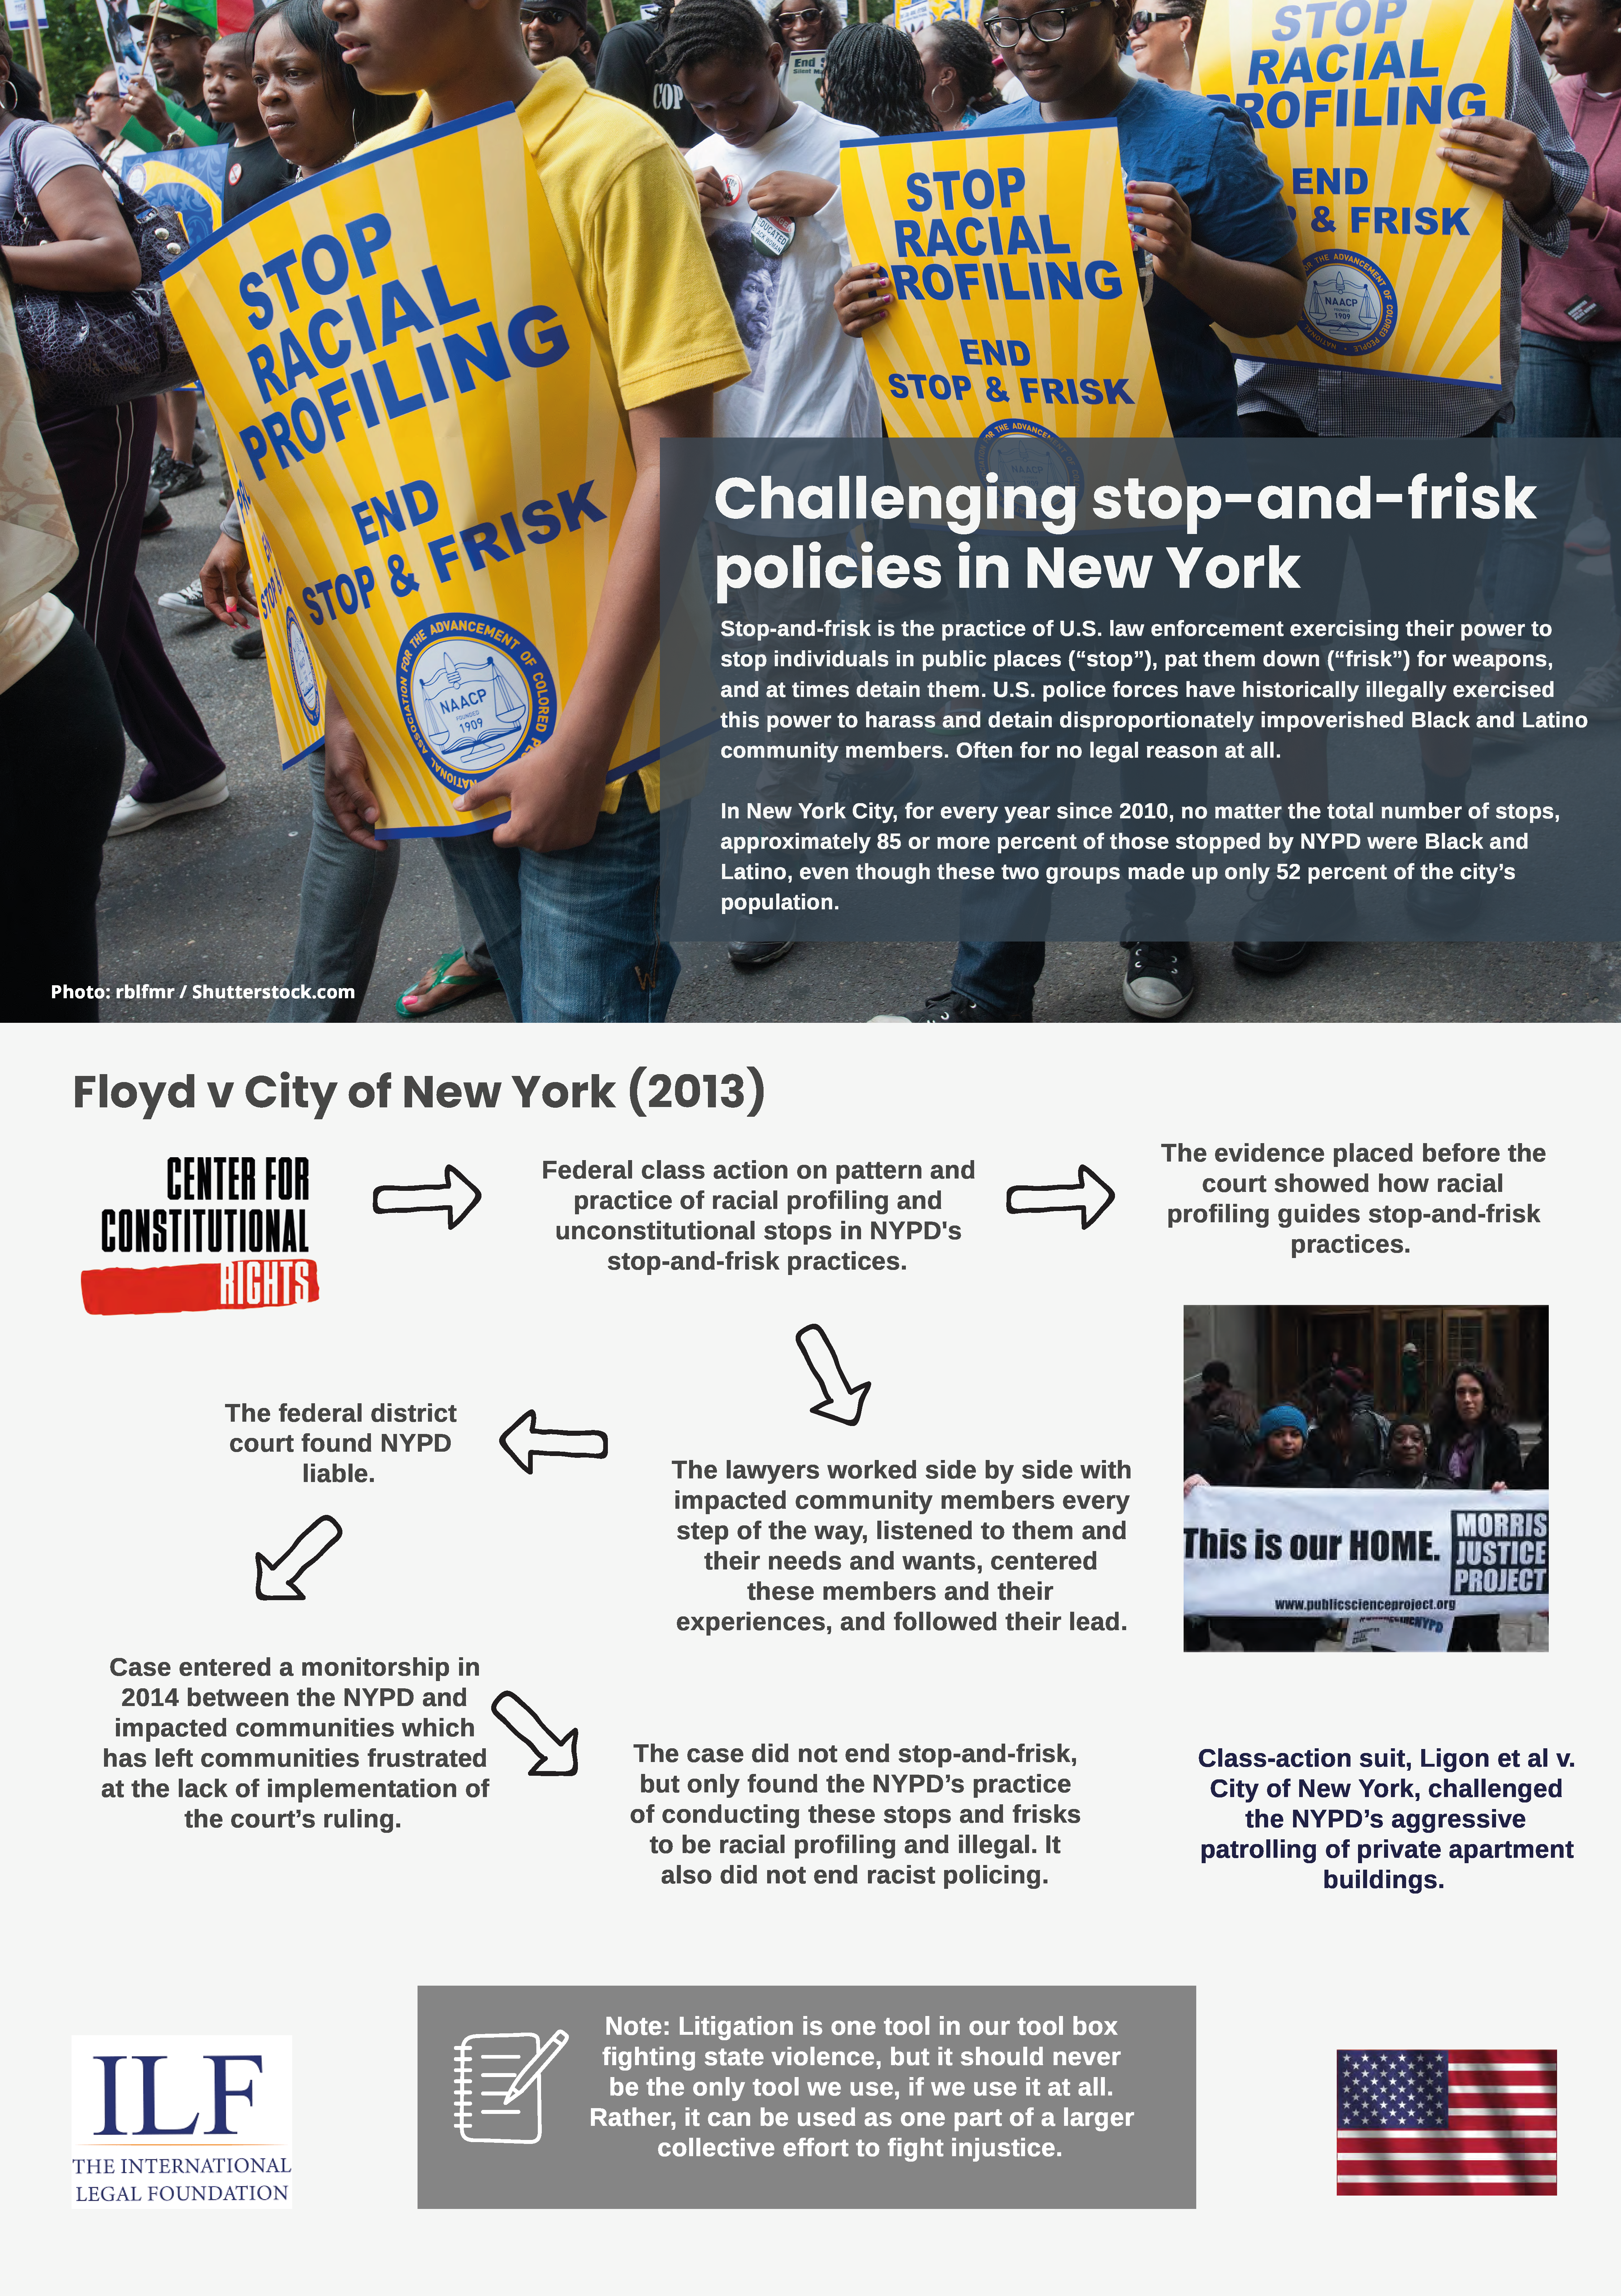 Challenging stop-and-frisk policies in New York